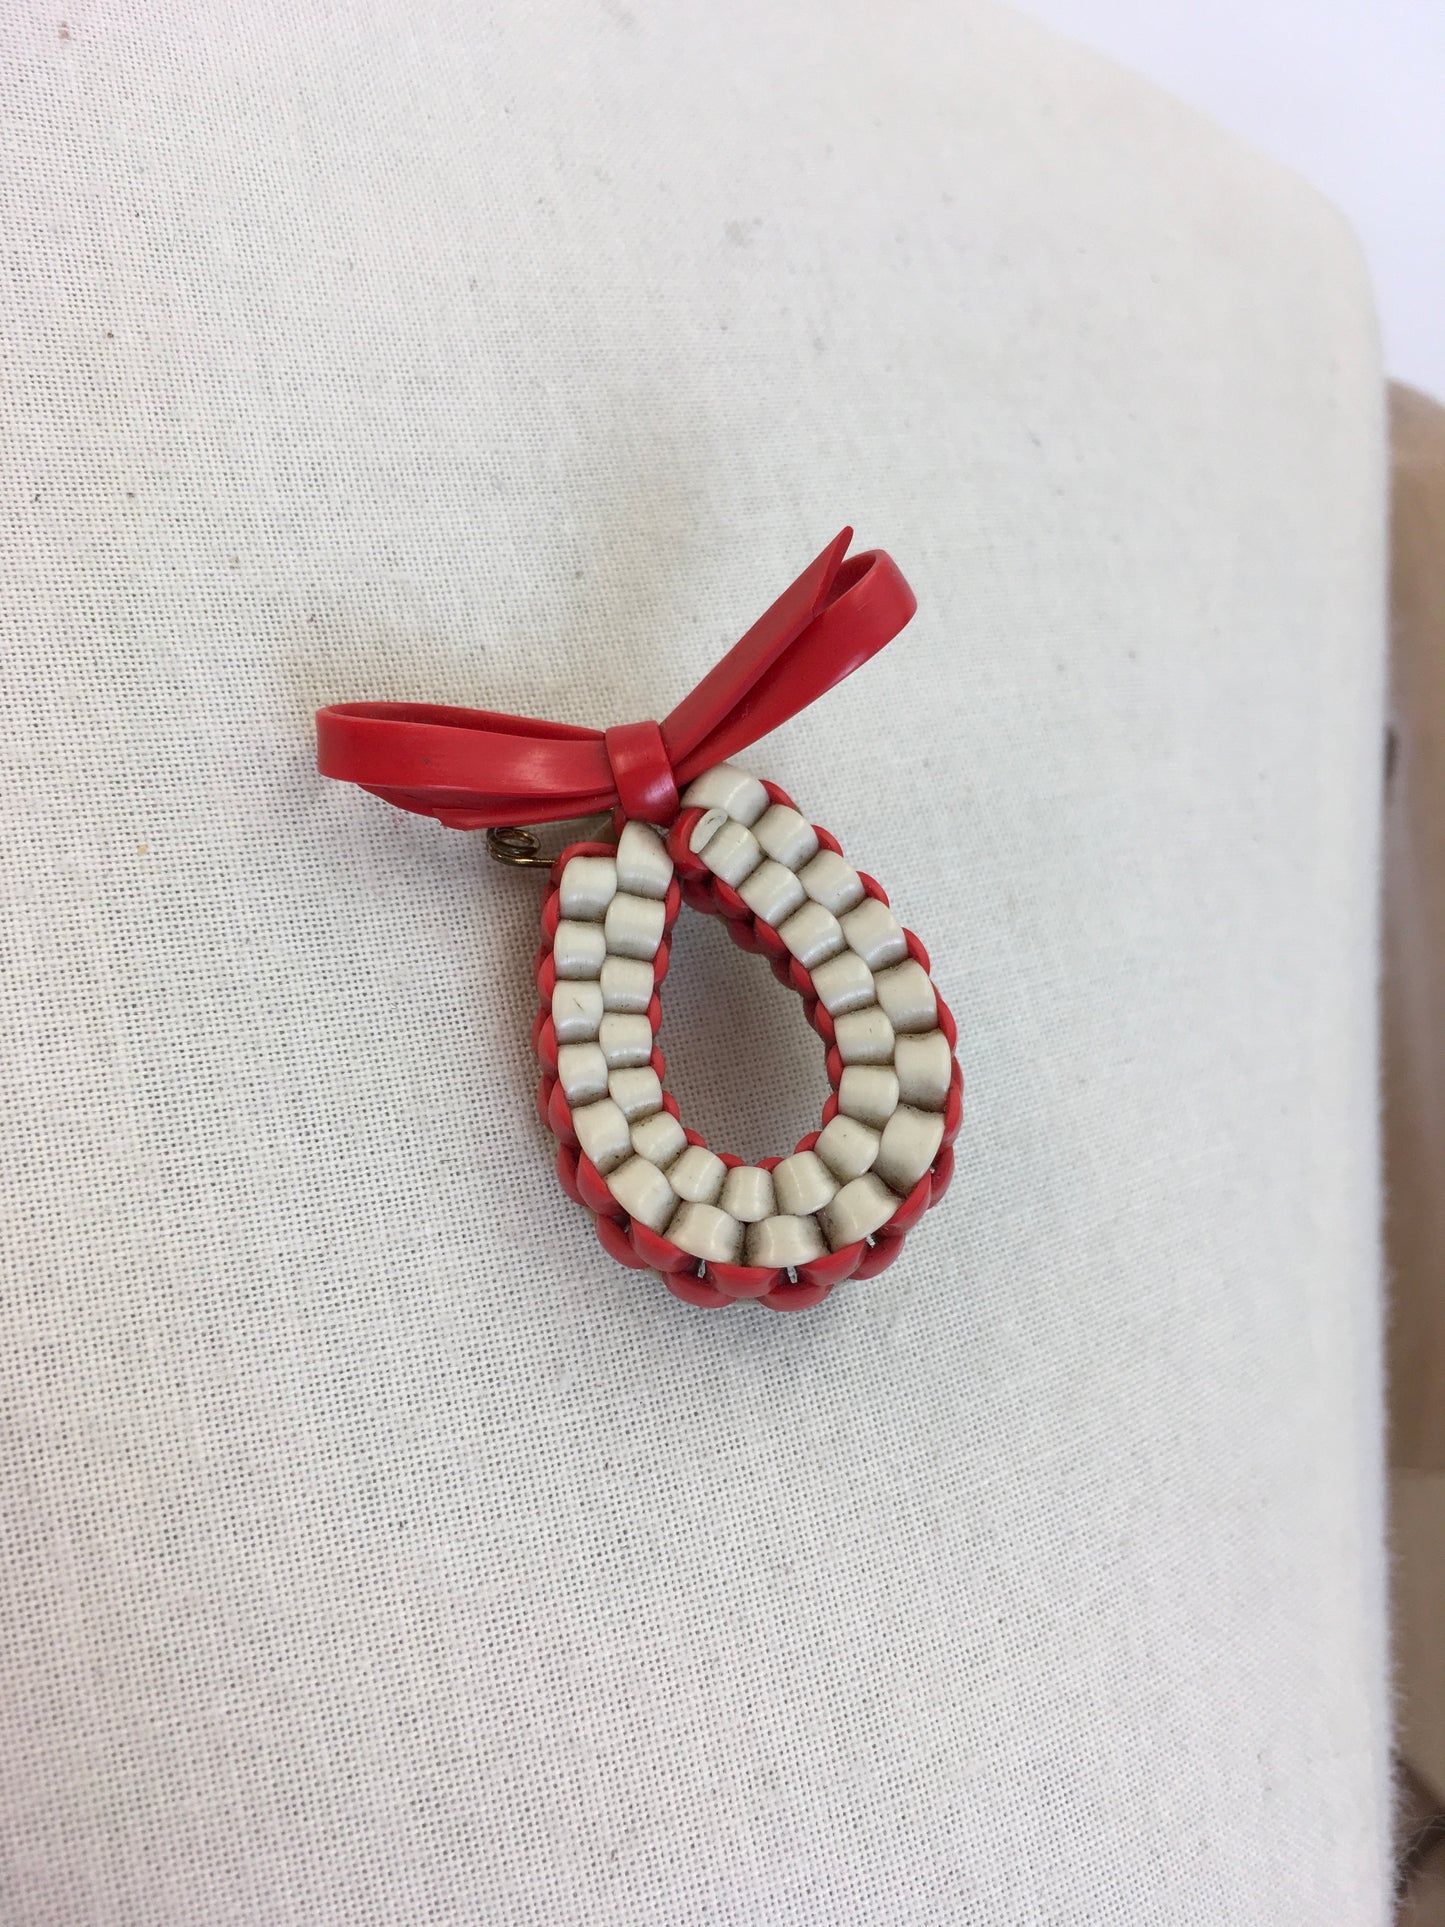 Original 1940’s Make Do and Mend Telephone Cord Brooch - In Red and White